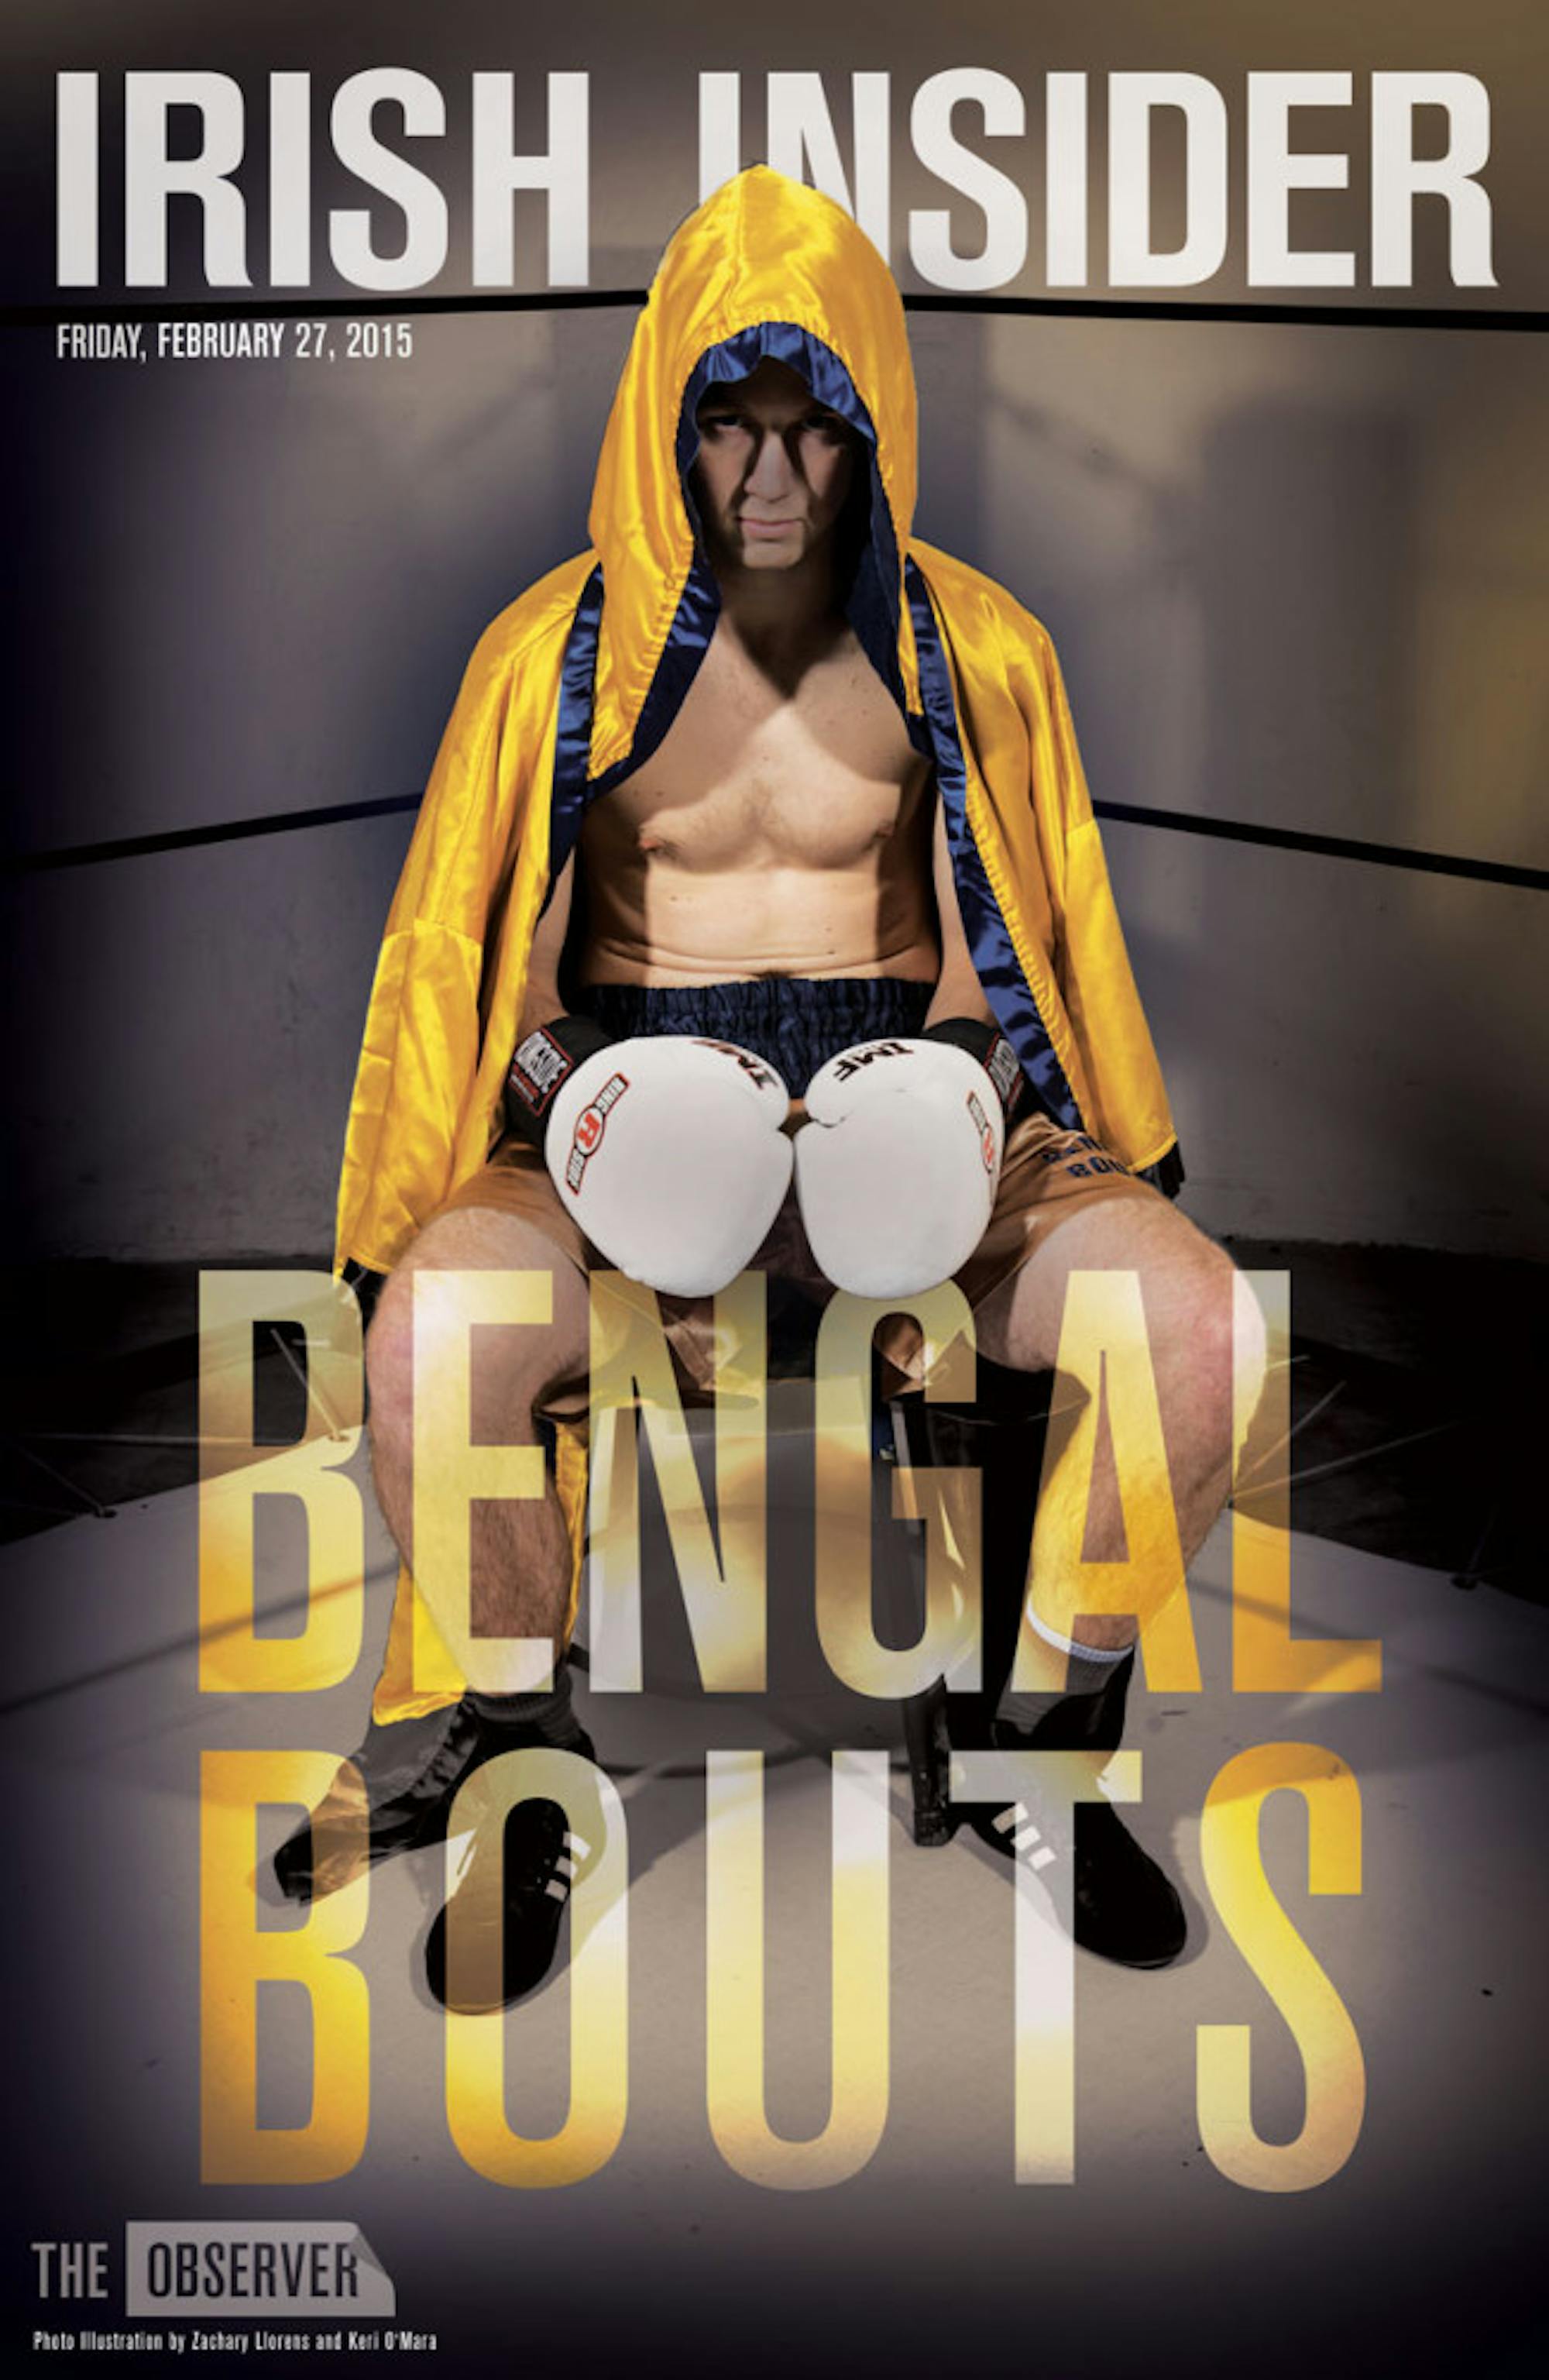 Bengal-Bouts-Insider-Cover